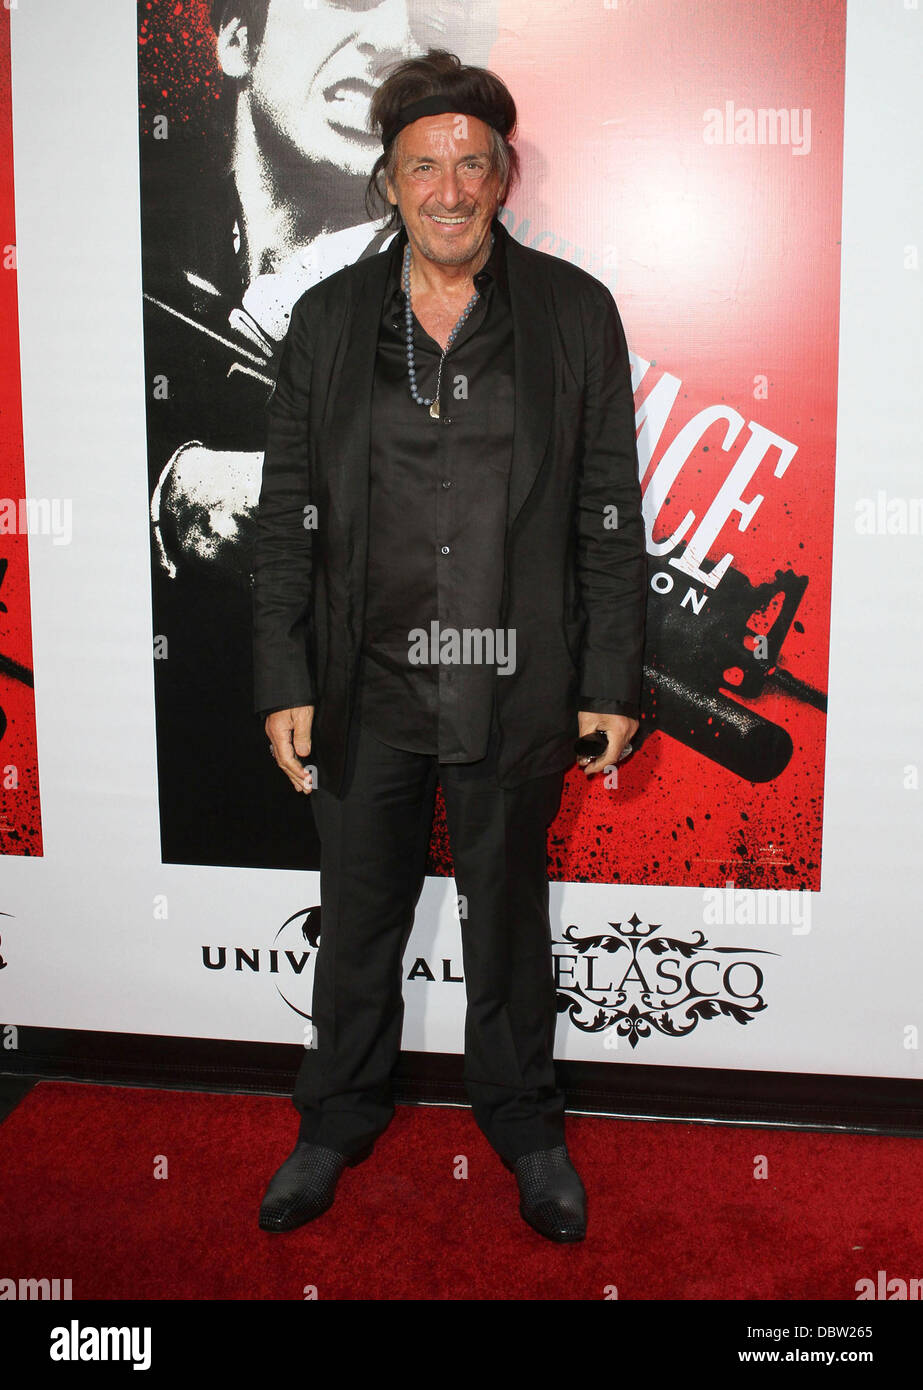 Al Pacino "Scarface" Blu-Ray DVD Release Party hosted by Ciroc held at  Belasco Theatre Los Angeles, California - 23.08.11 Stock Photo - Alamy